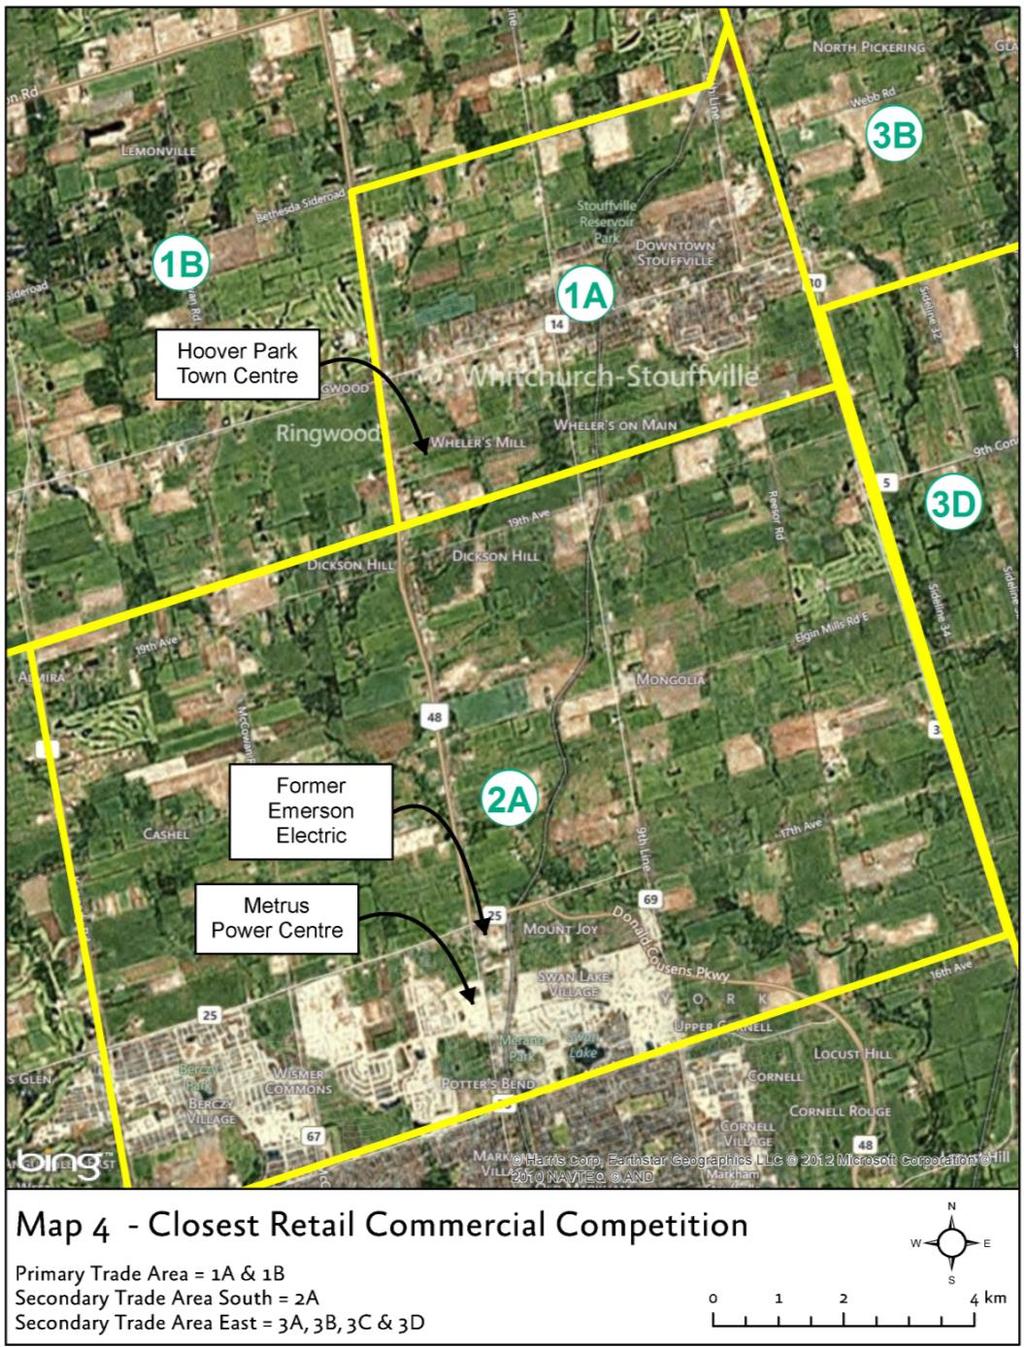 5.2 Stouffville s Closest Competition Community of Stouffville Commercial Policy Study Update Background and Analysis Report The Community of Stouffville s closest retail commercial competition is